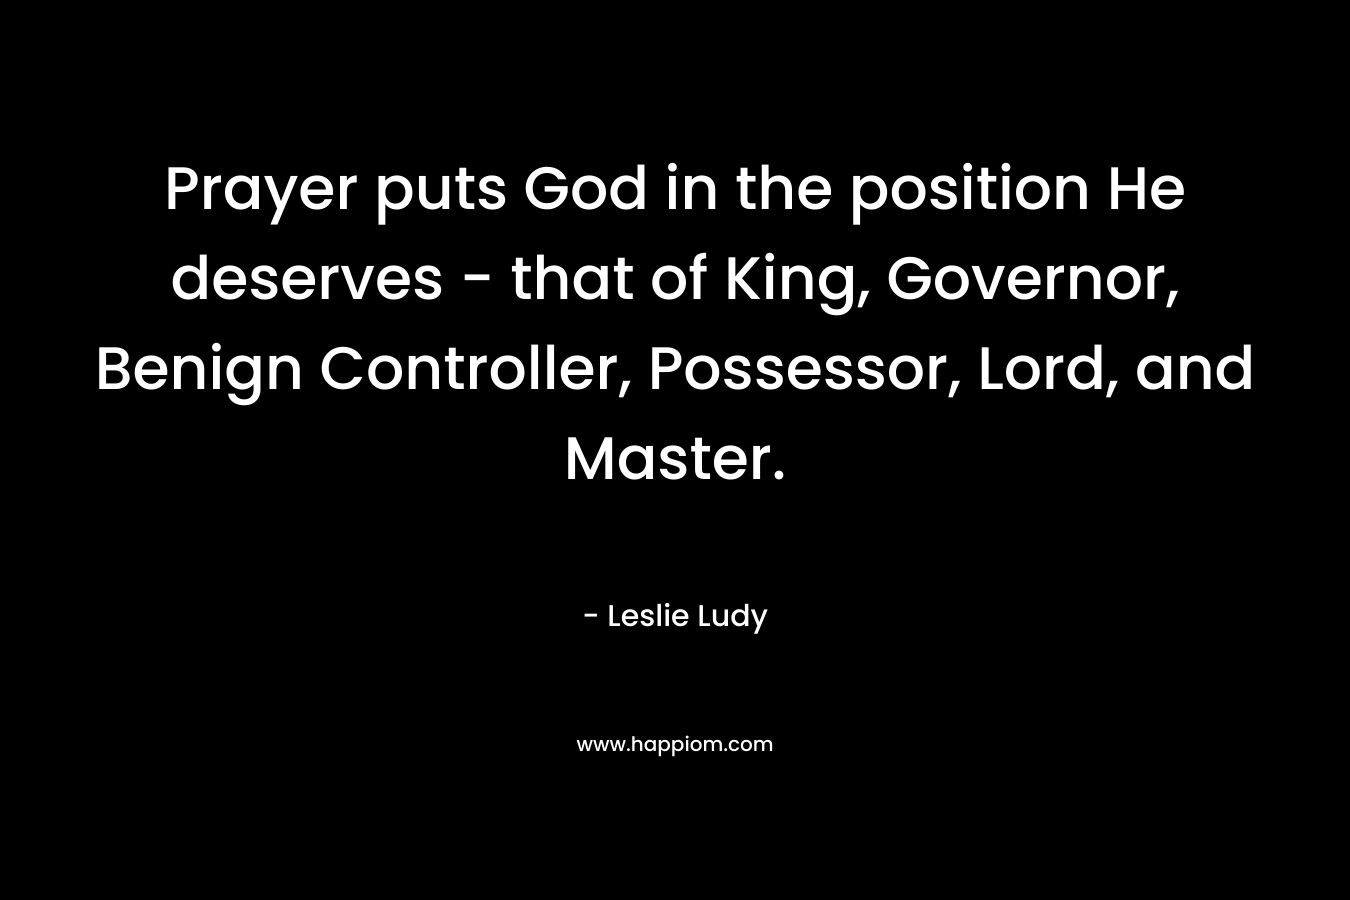 Prayer puts God in the position He deserves - that of King, Governor, Benign Controller, Possessor, Lord, and Master.